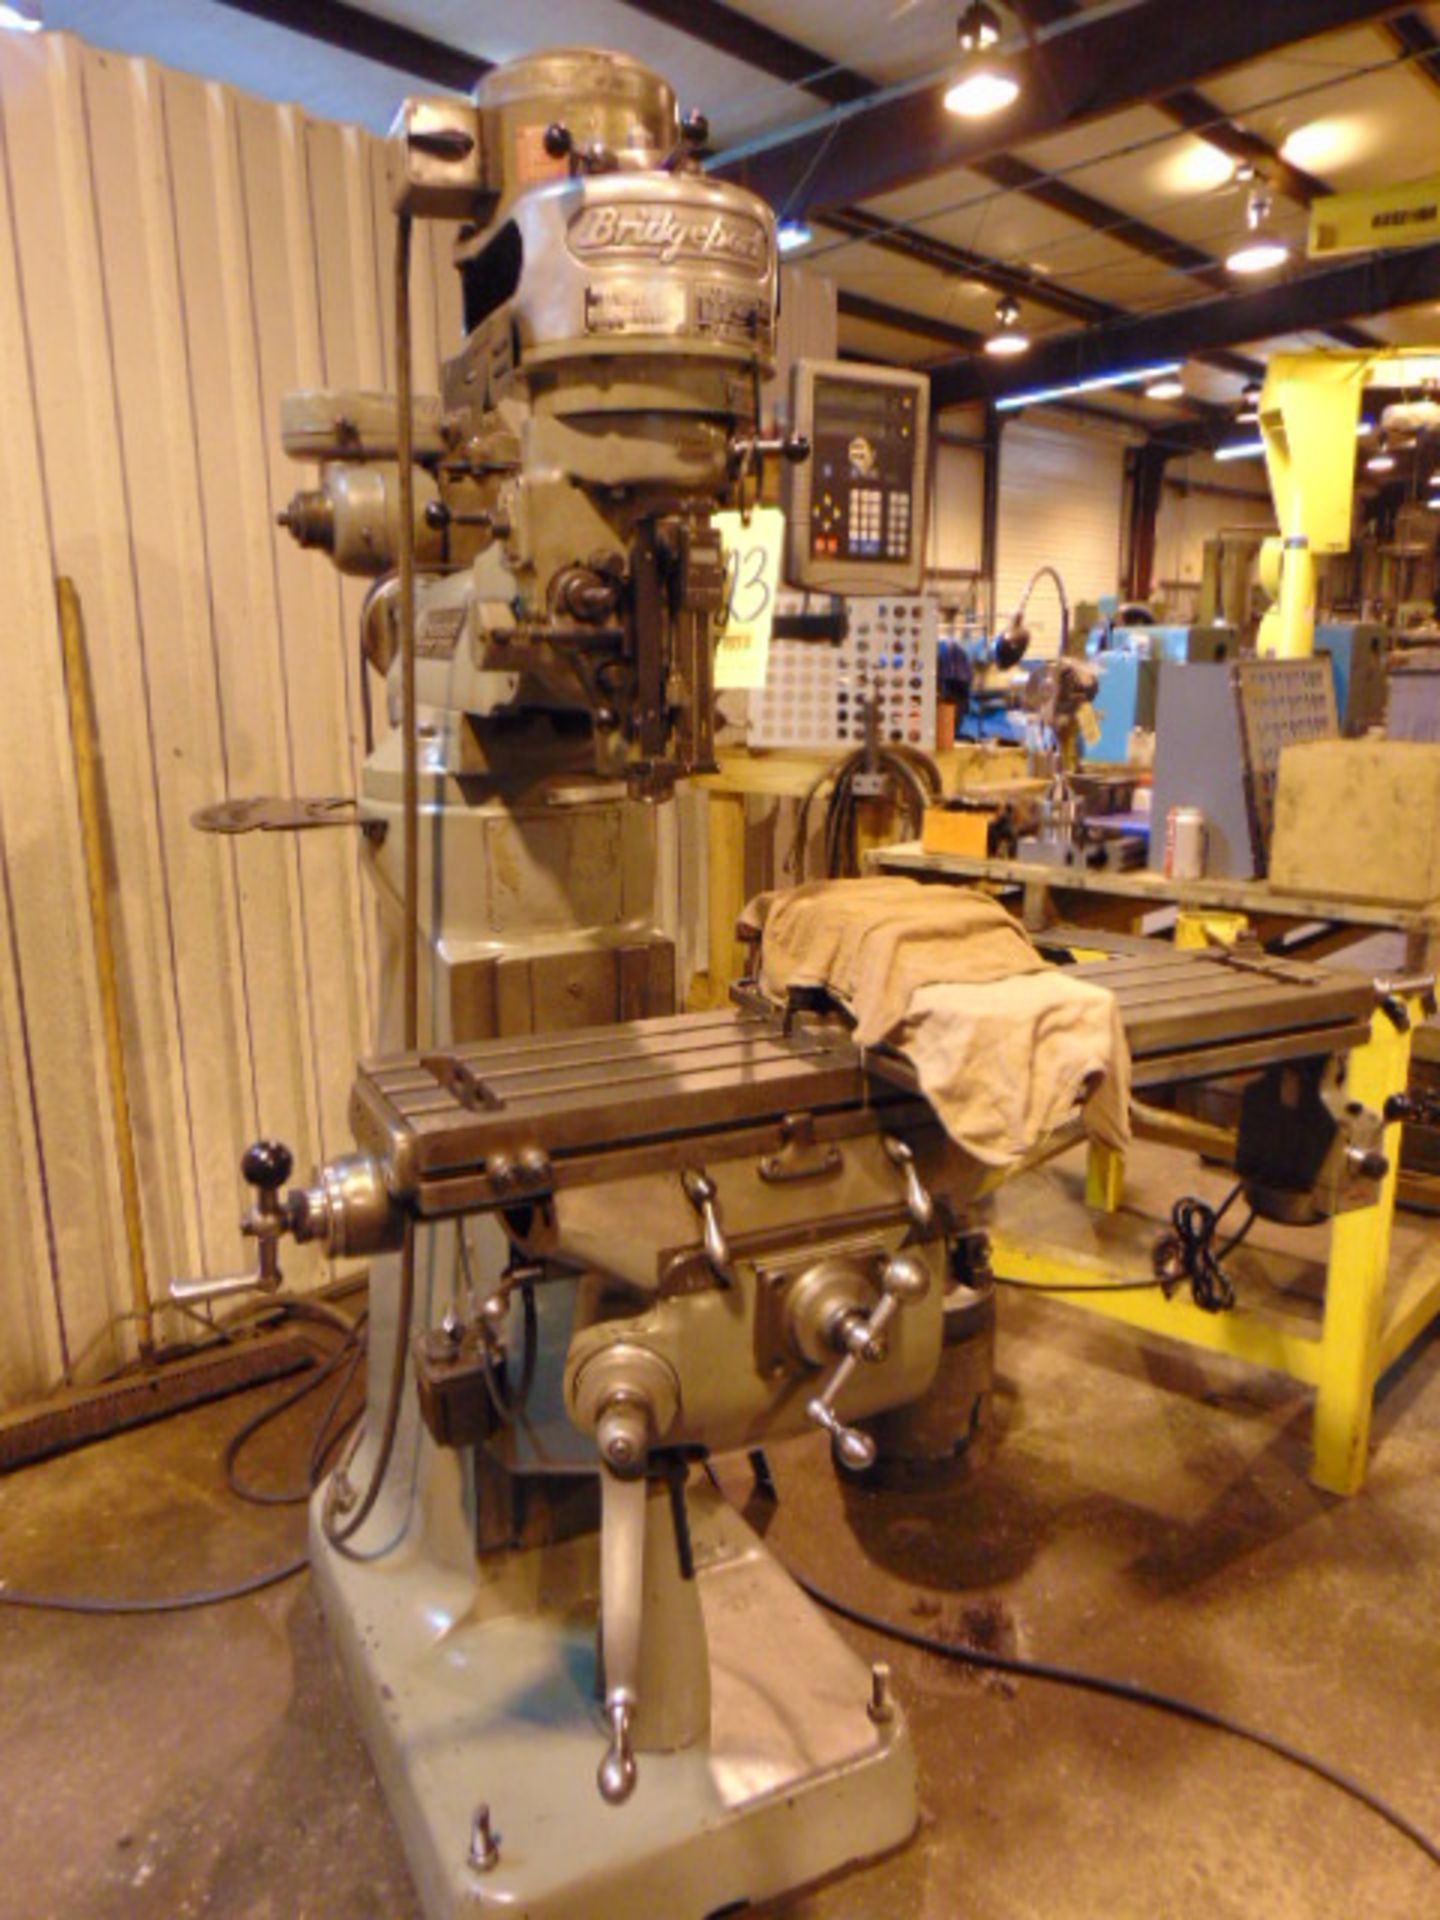 VERTICAL TURRET MILL, BRIDGEPORT J-HEAD, 9” x 42” table, 1 HP step pulley head, Newall 2-axis D.R.